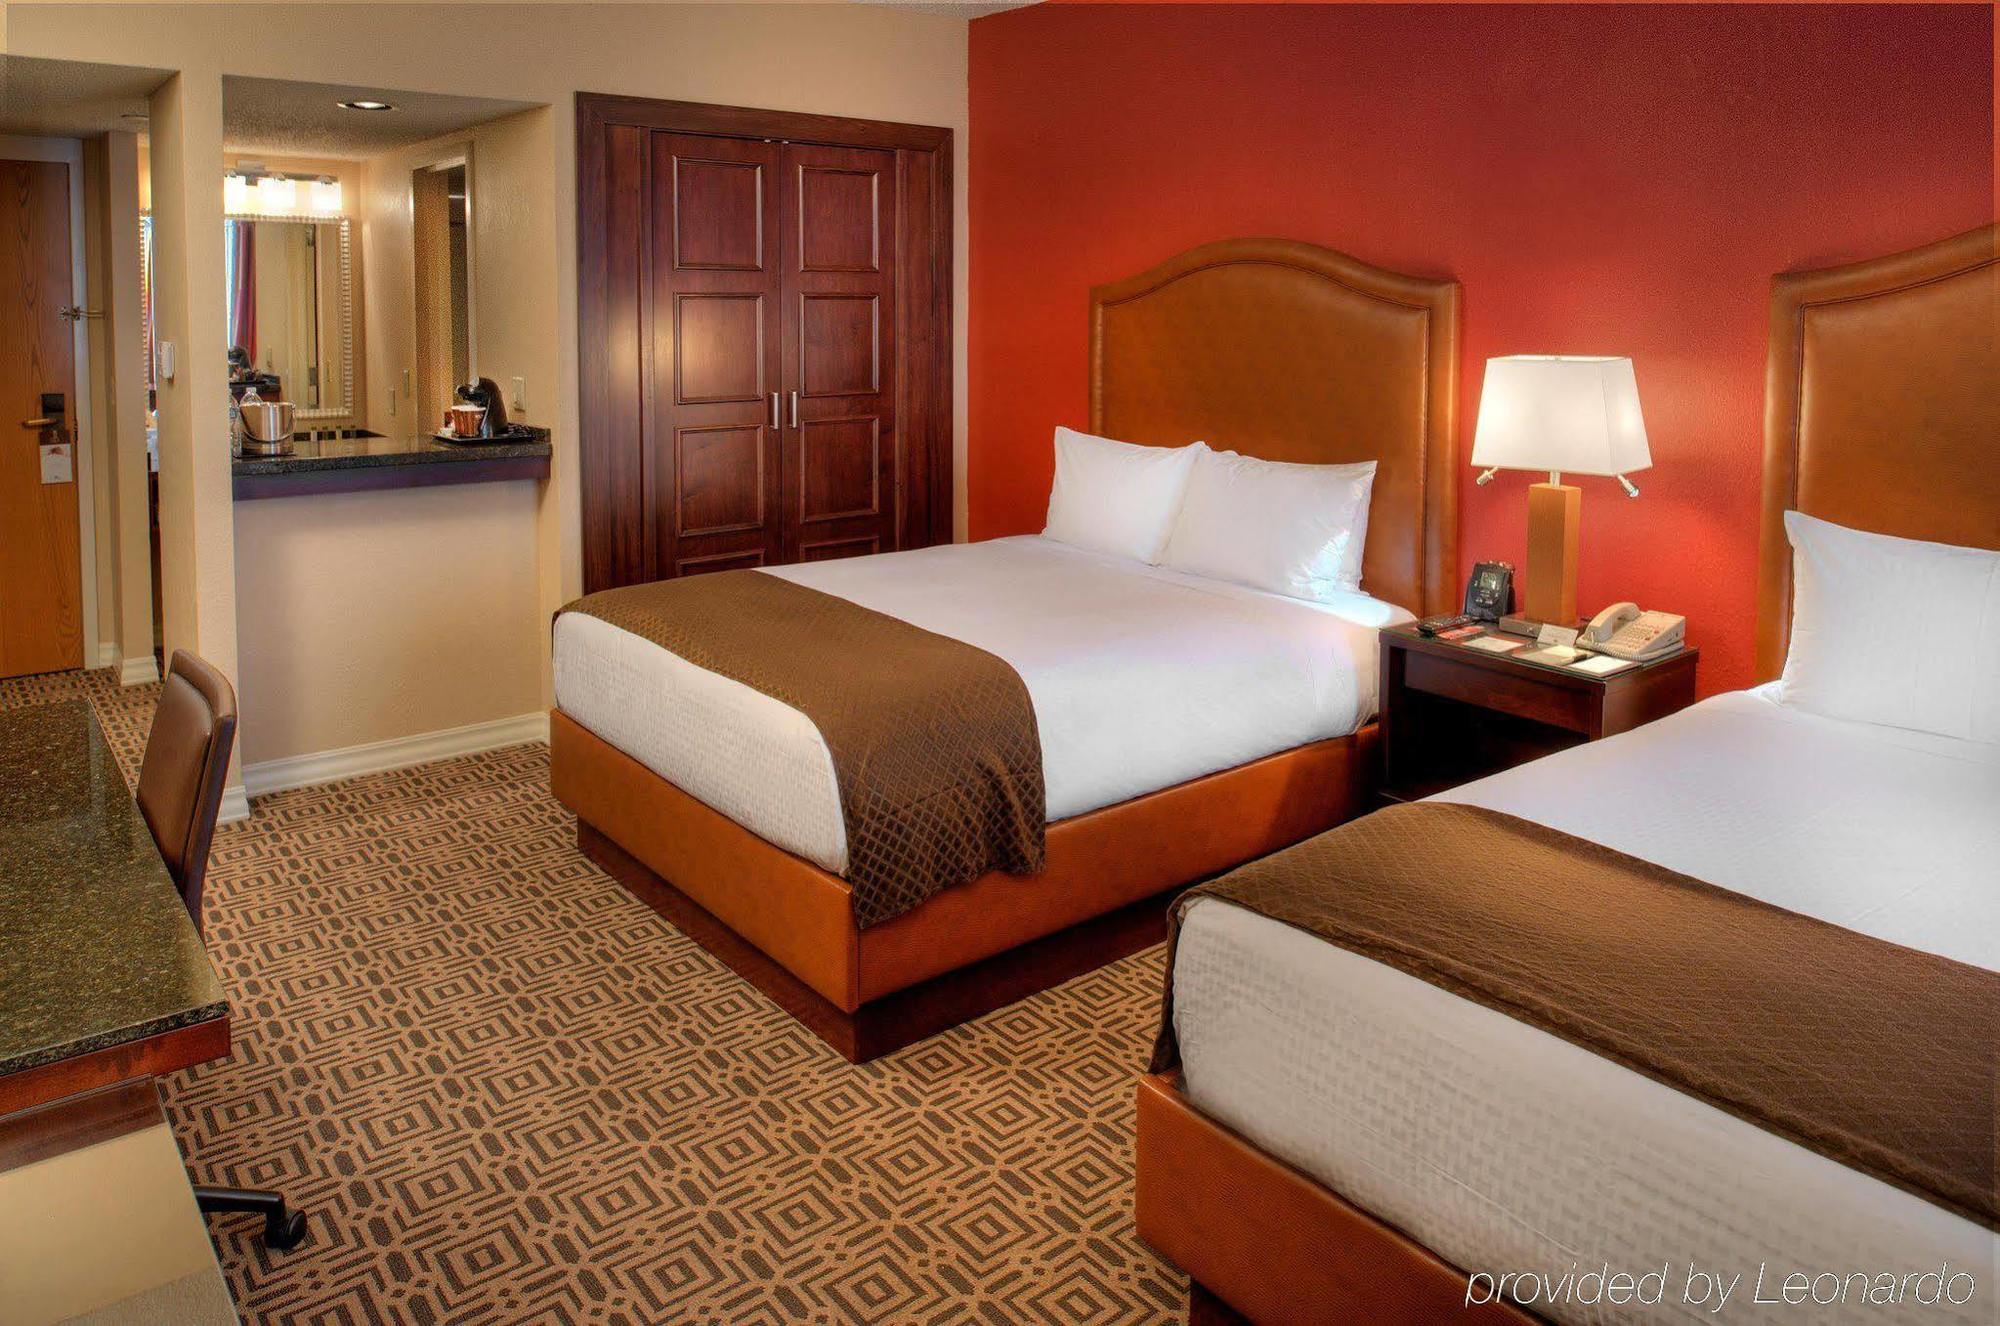 Doubletree By Hilton Hotel St. Louis - Chesterfield Room photo